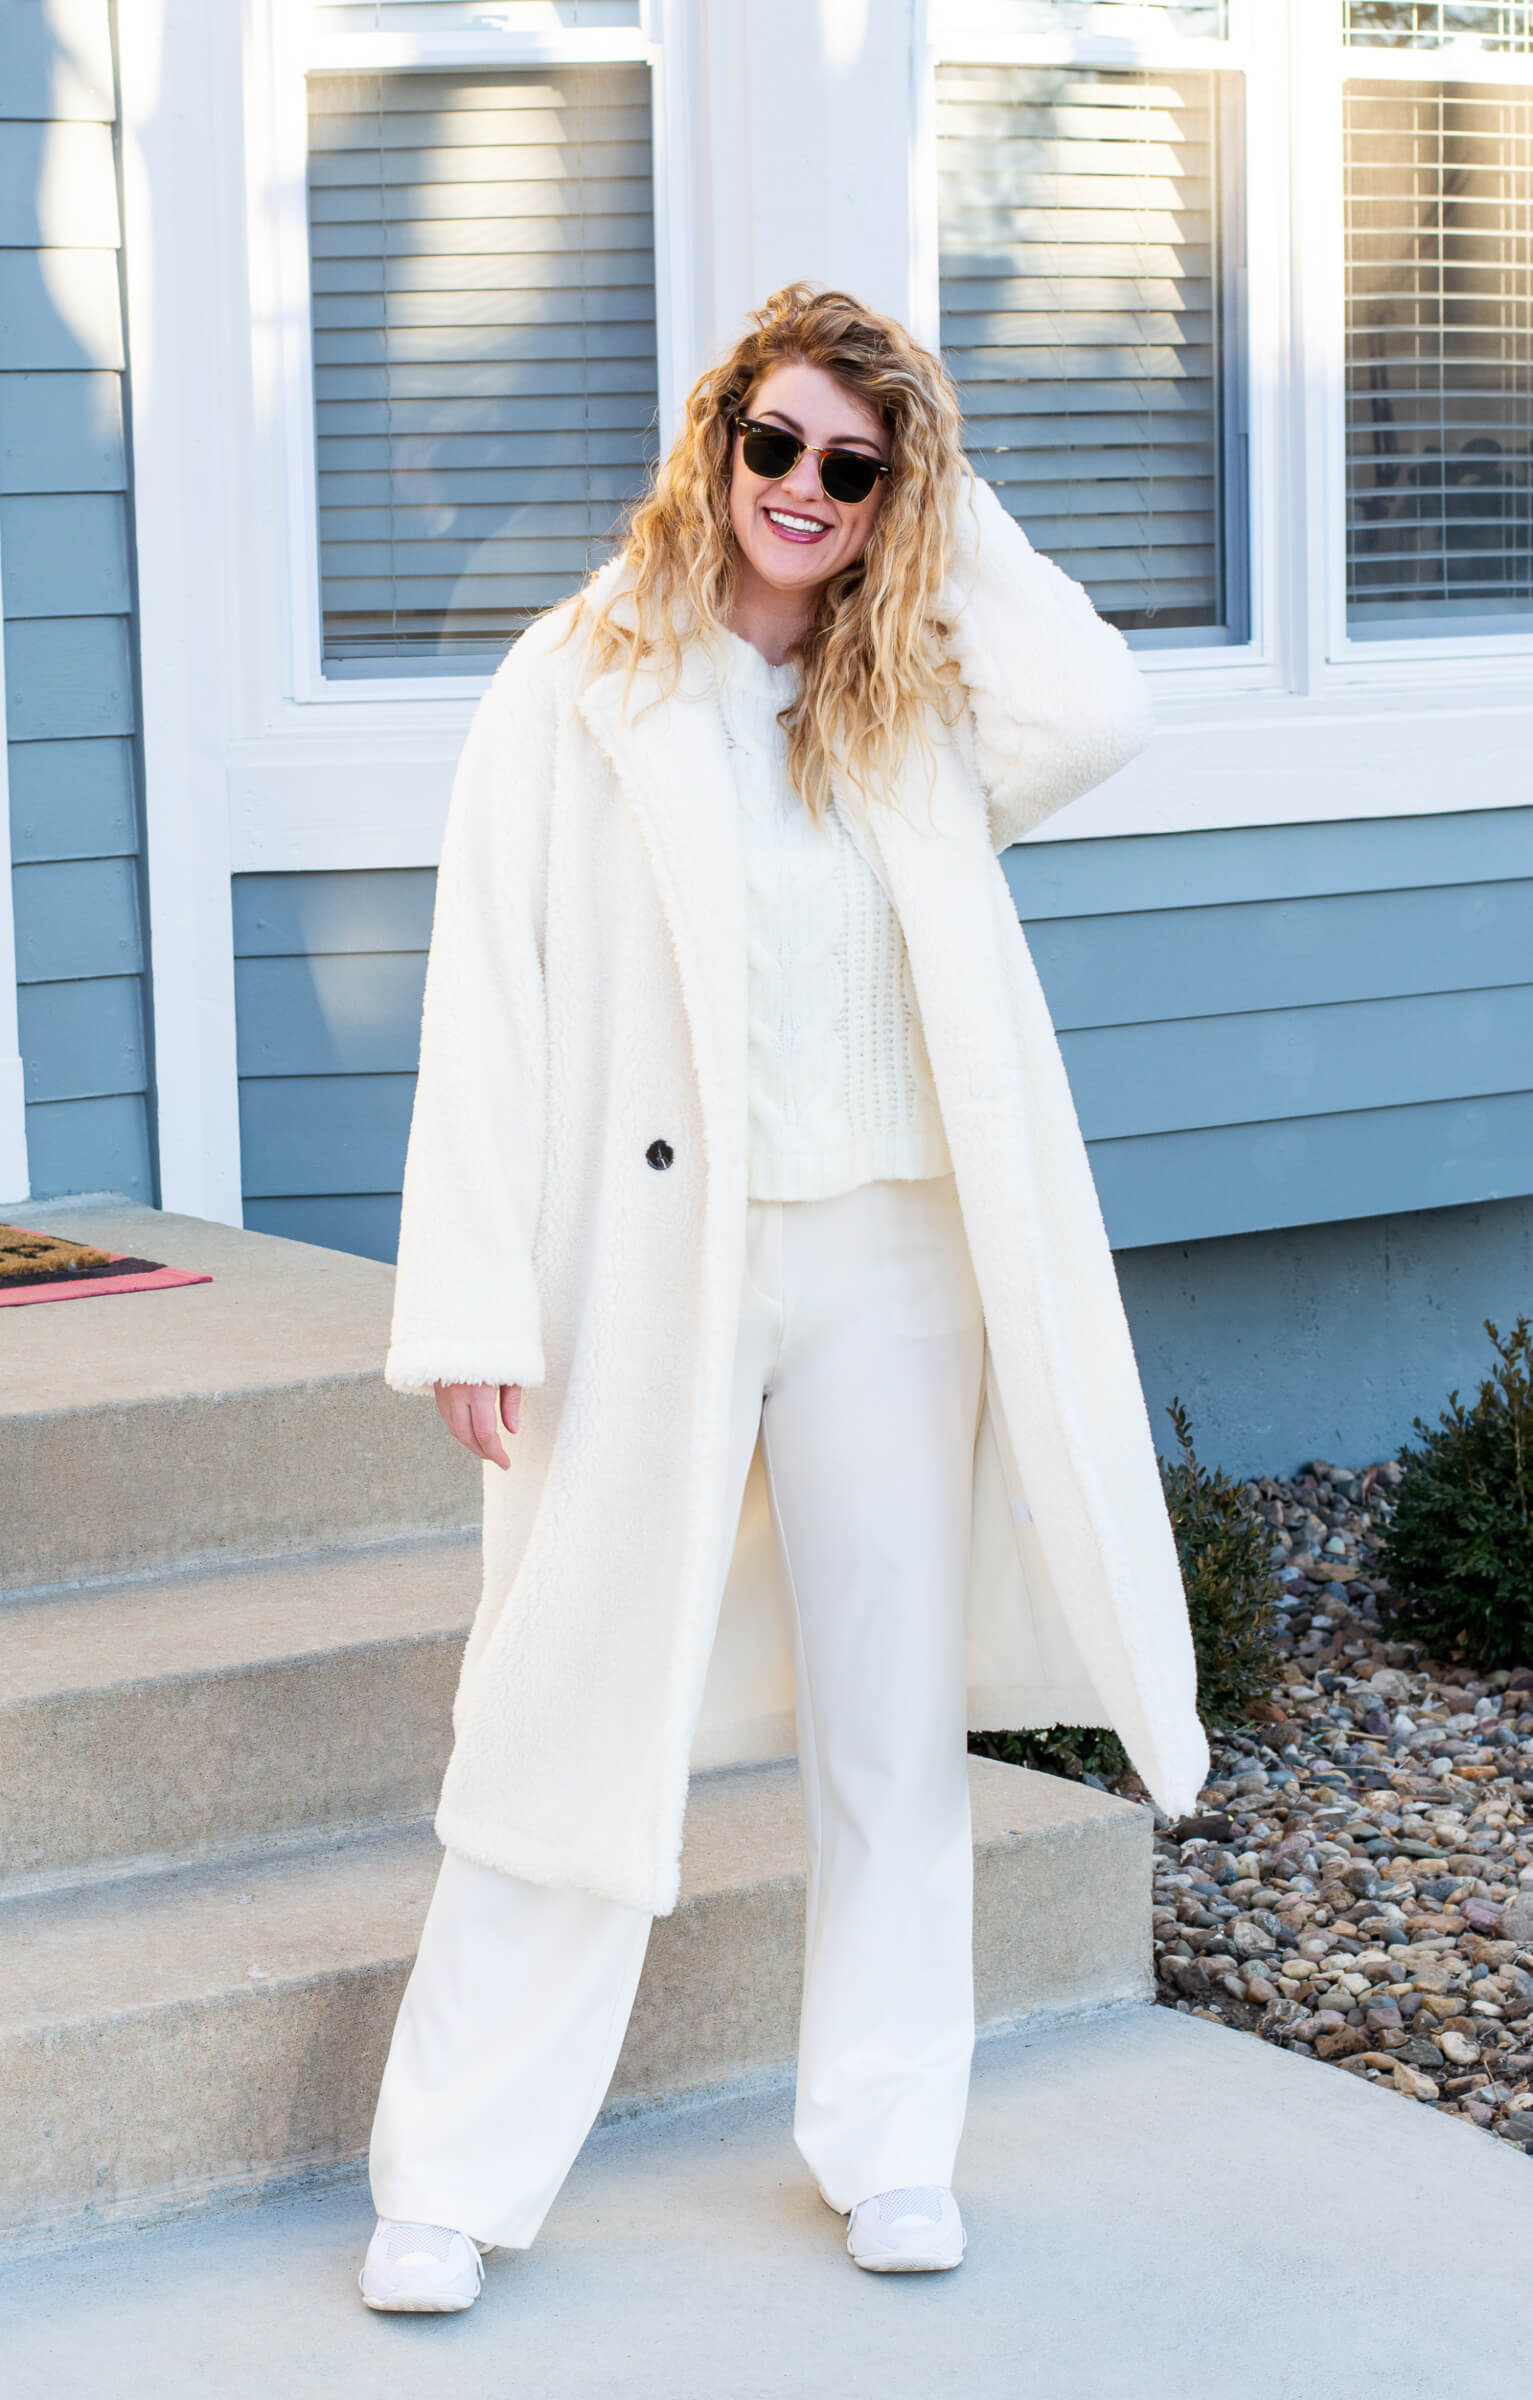 All-Winter White Outfit + Chunky Sneakers.